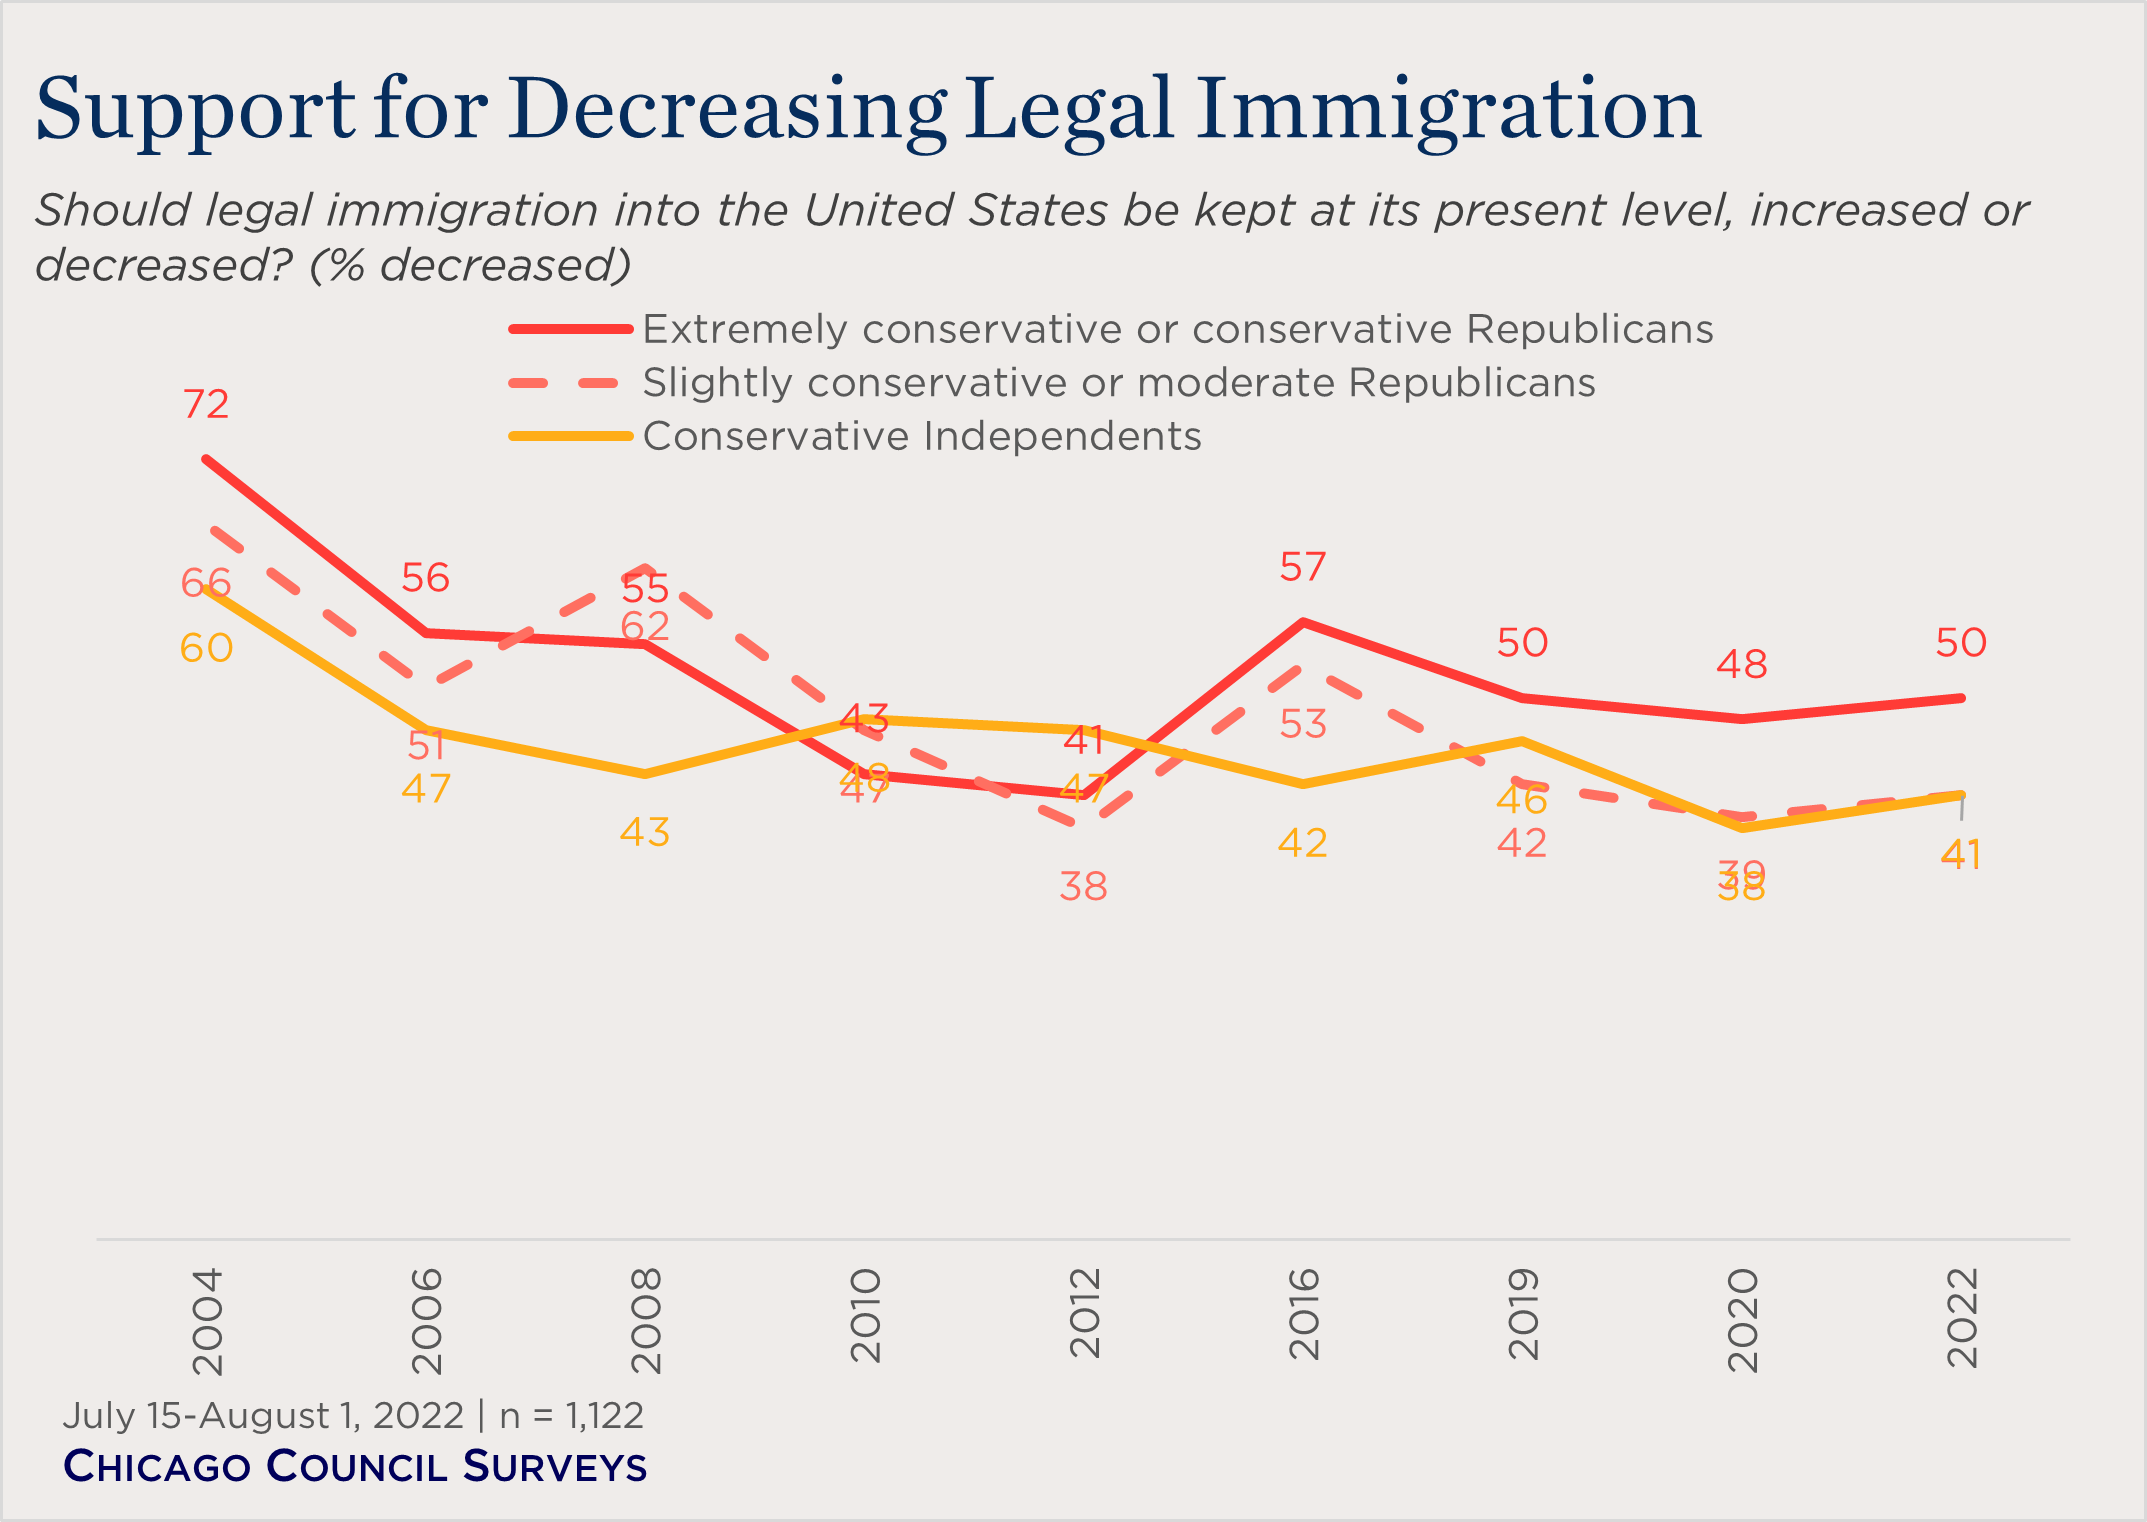 "line chart showing ideological views on decreasing legal immigration"